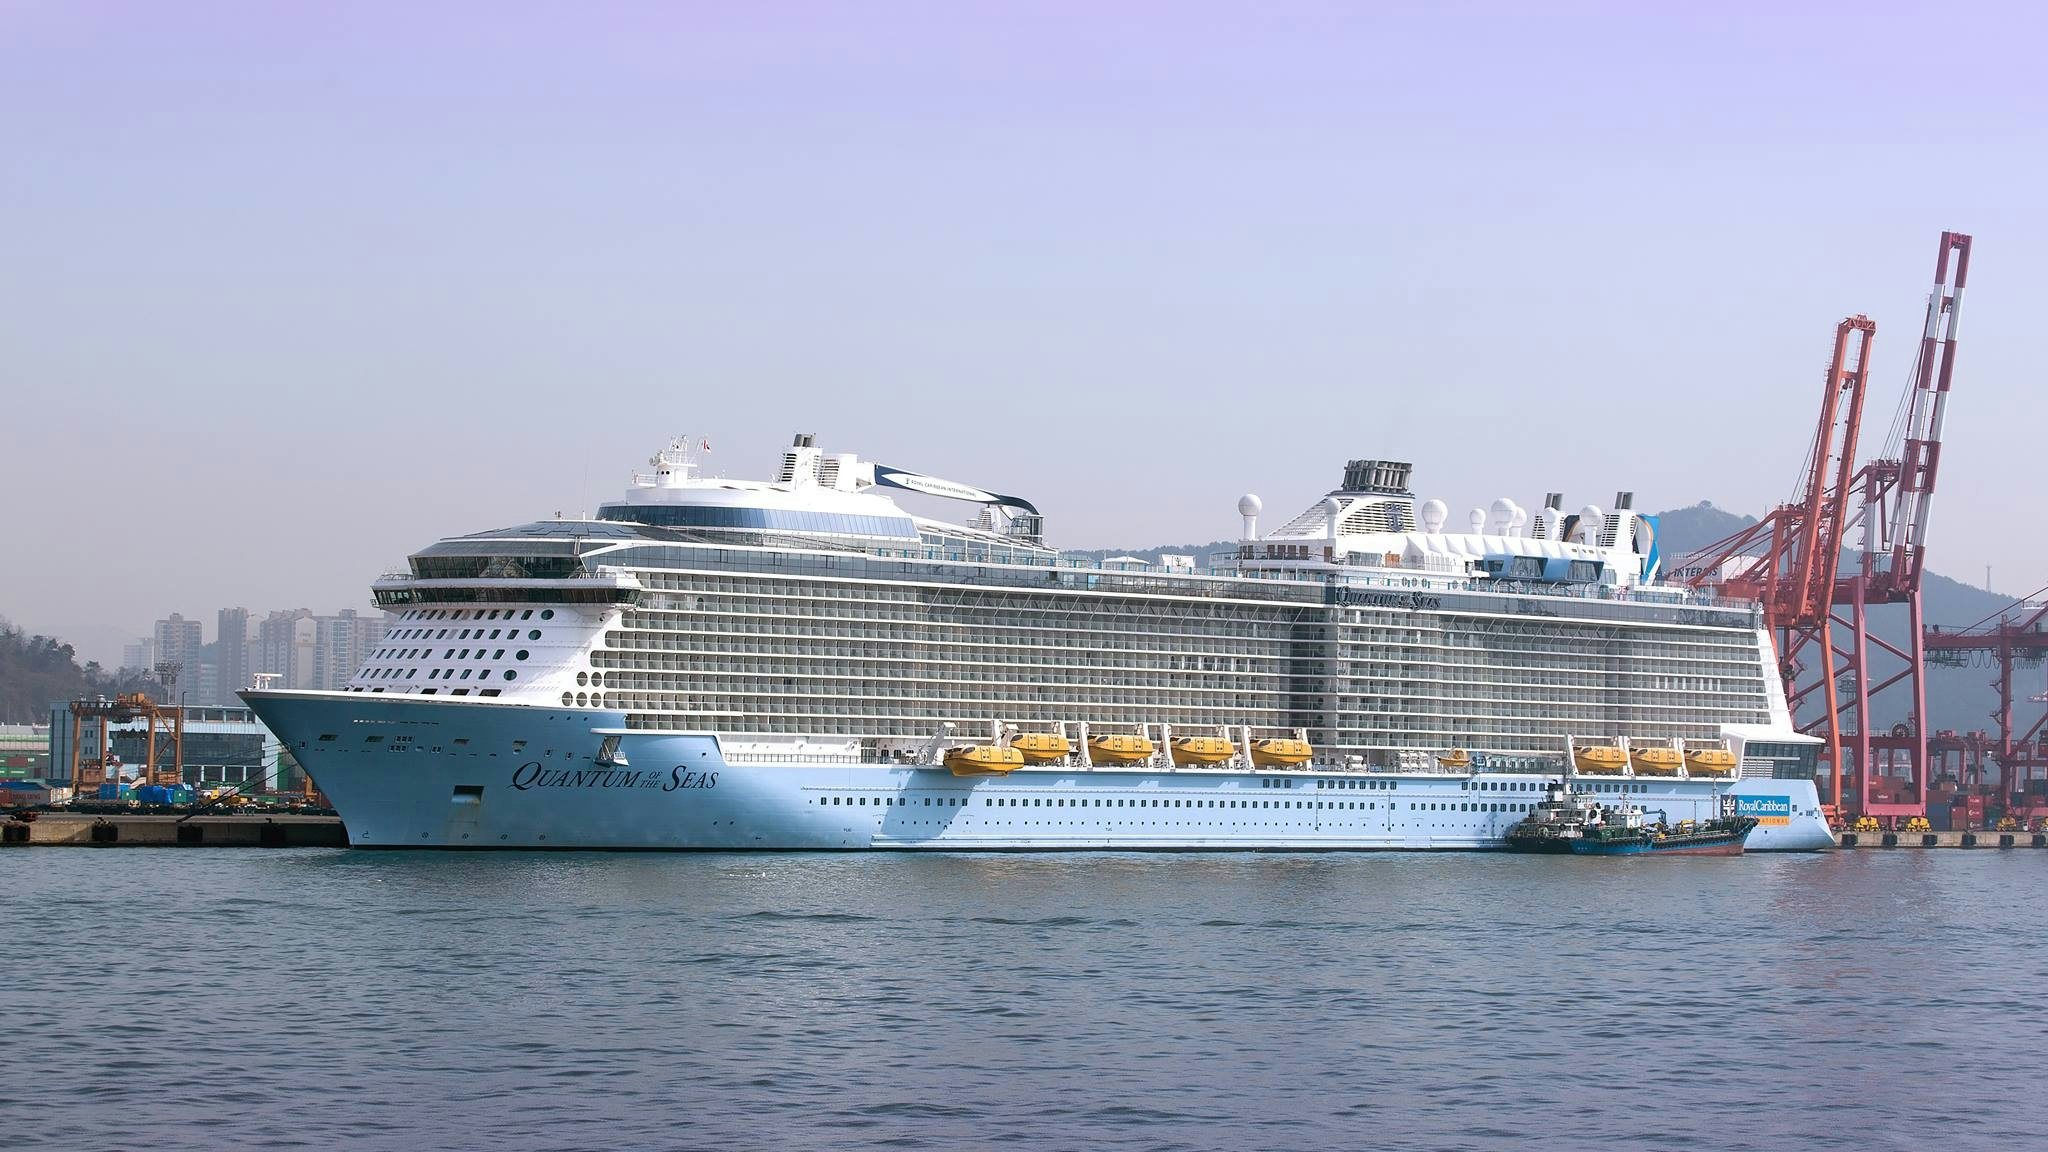 The Shanghai based, Royal Caribbean cruise ship Quantum of the Seas in Busan, South Korea. Royal Caribbean is increasing its efforts in China with the construction of a new cruise ship but has virtually eliminated itineraries that include South Korea. Photo: Shutterstock